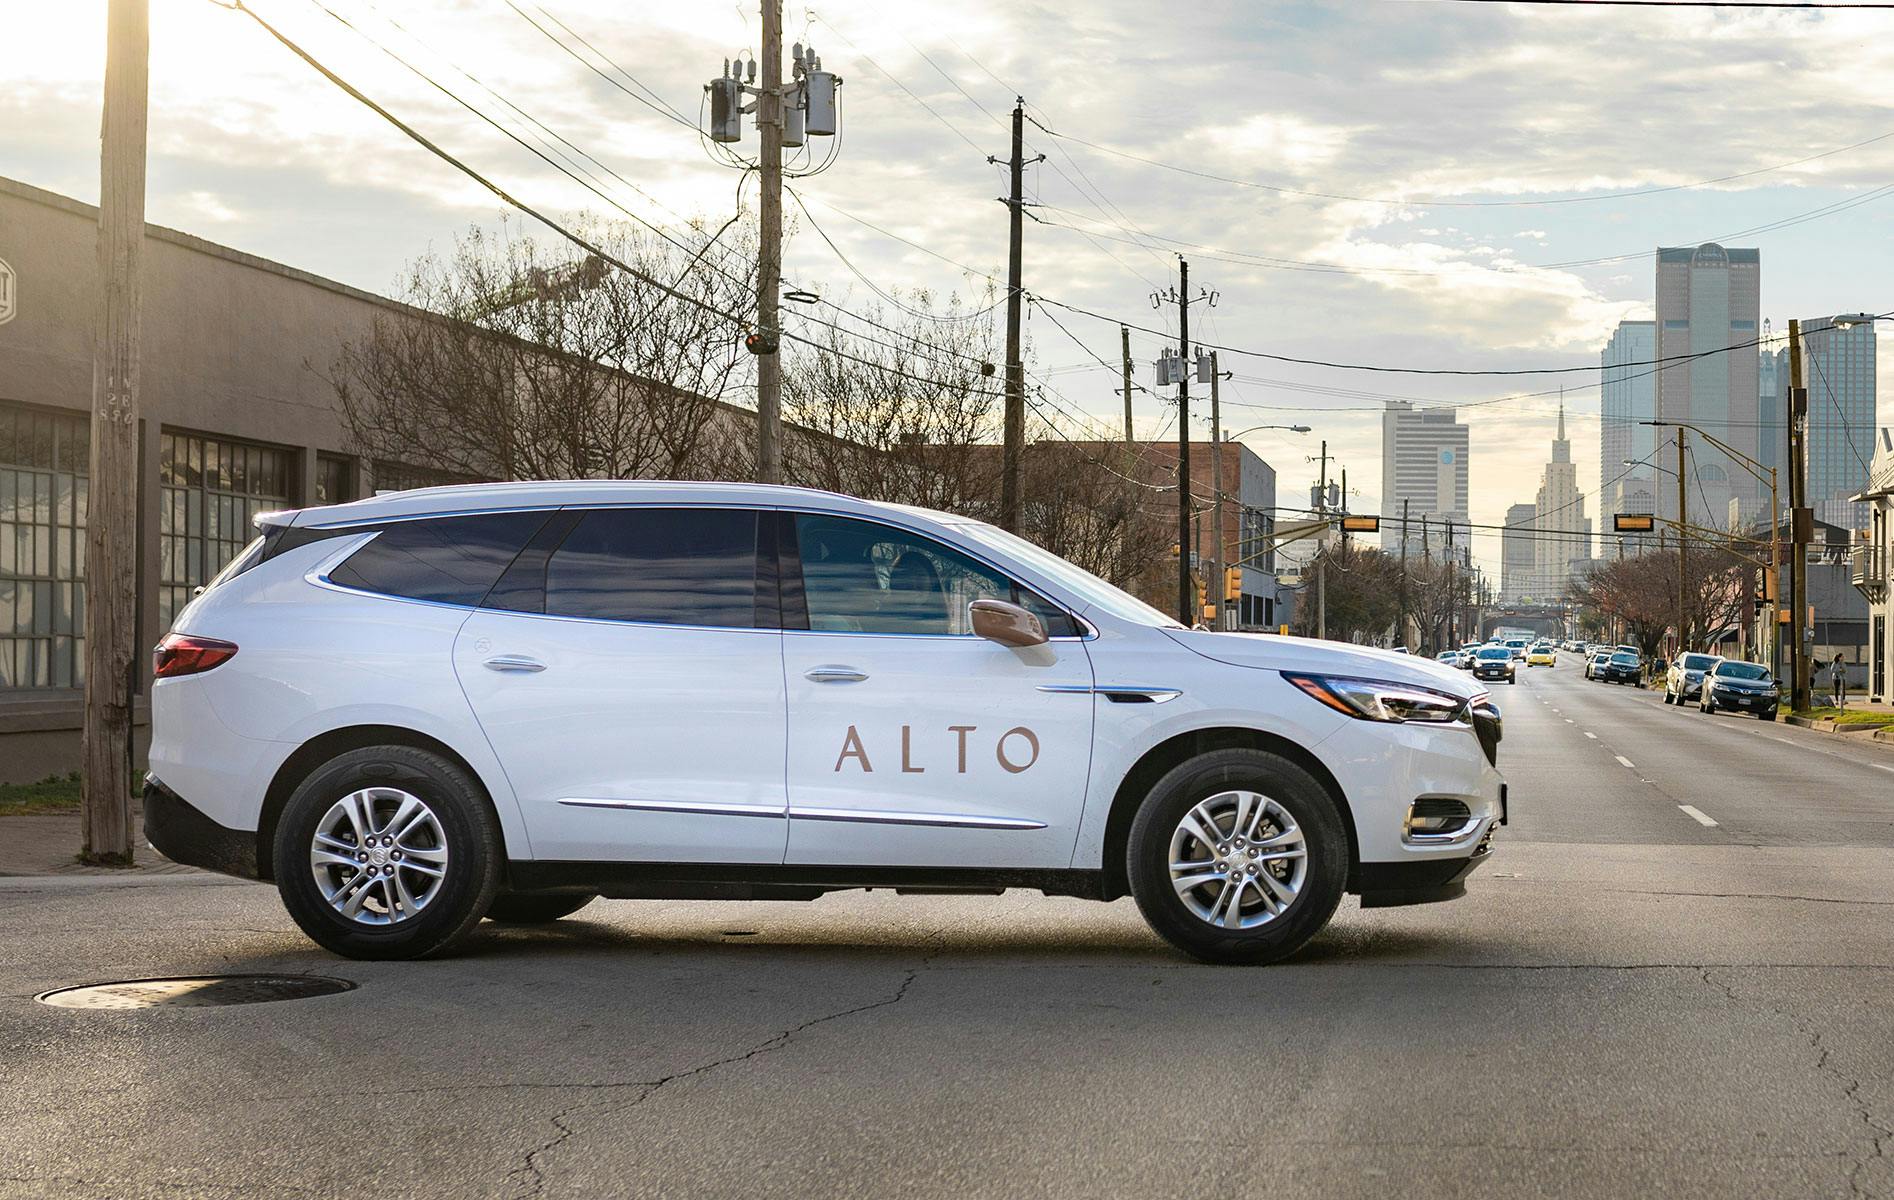 My Number One Rideshare - Alto Arrives In Miami — The Grateful Gardenia